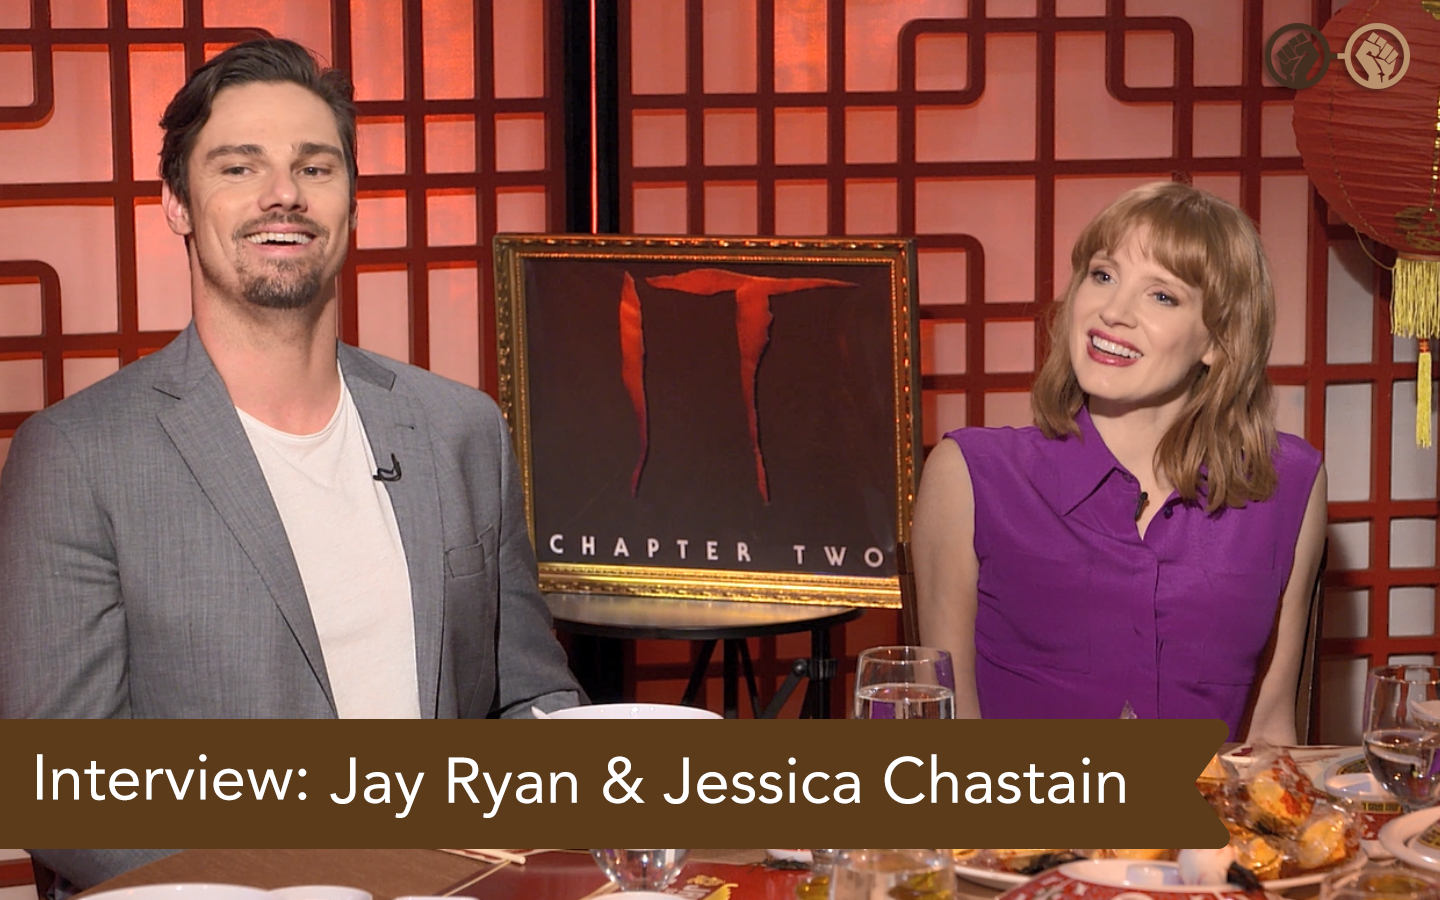 Interview: Jessica Chastain and Jay Ryan Discuss Most Difficult Scenes to Film, Favorite Karaoke Songs & More